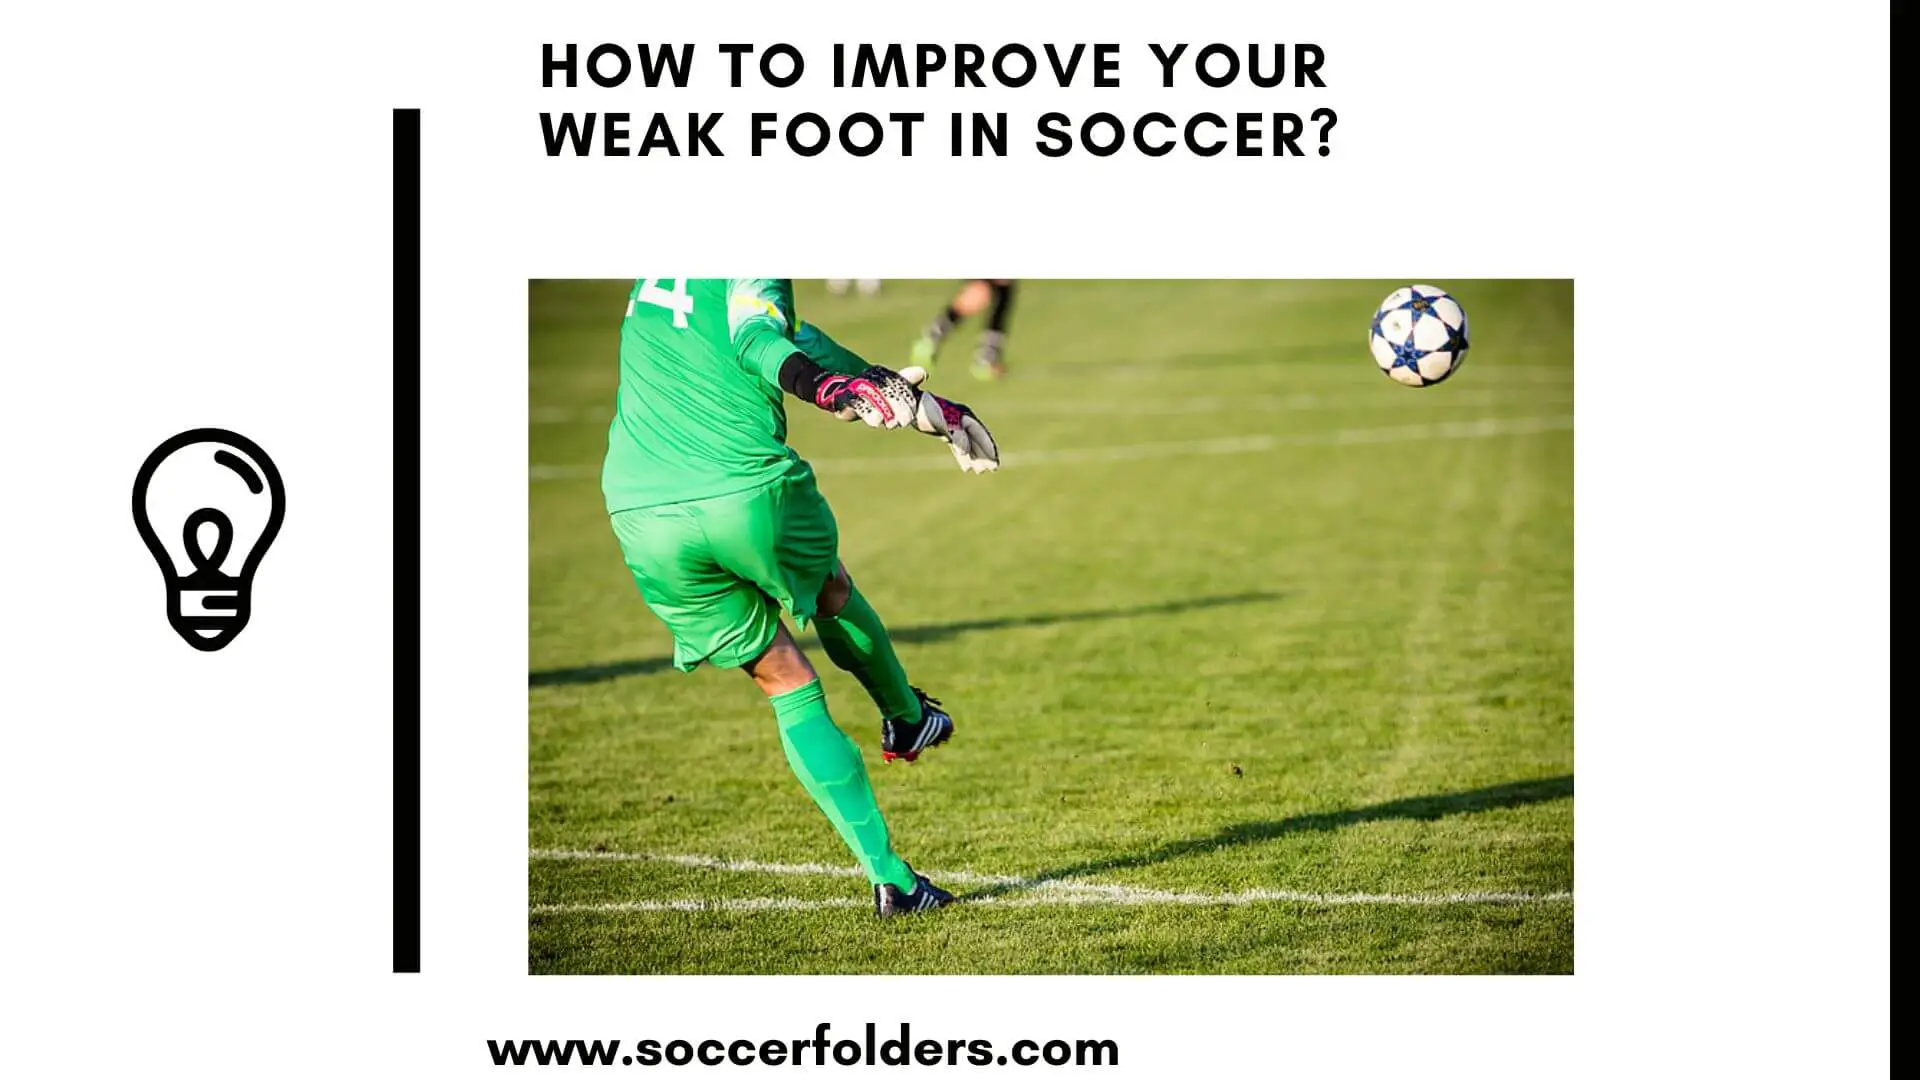 How to improve your weak foot in soccer - Featured image